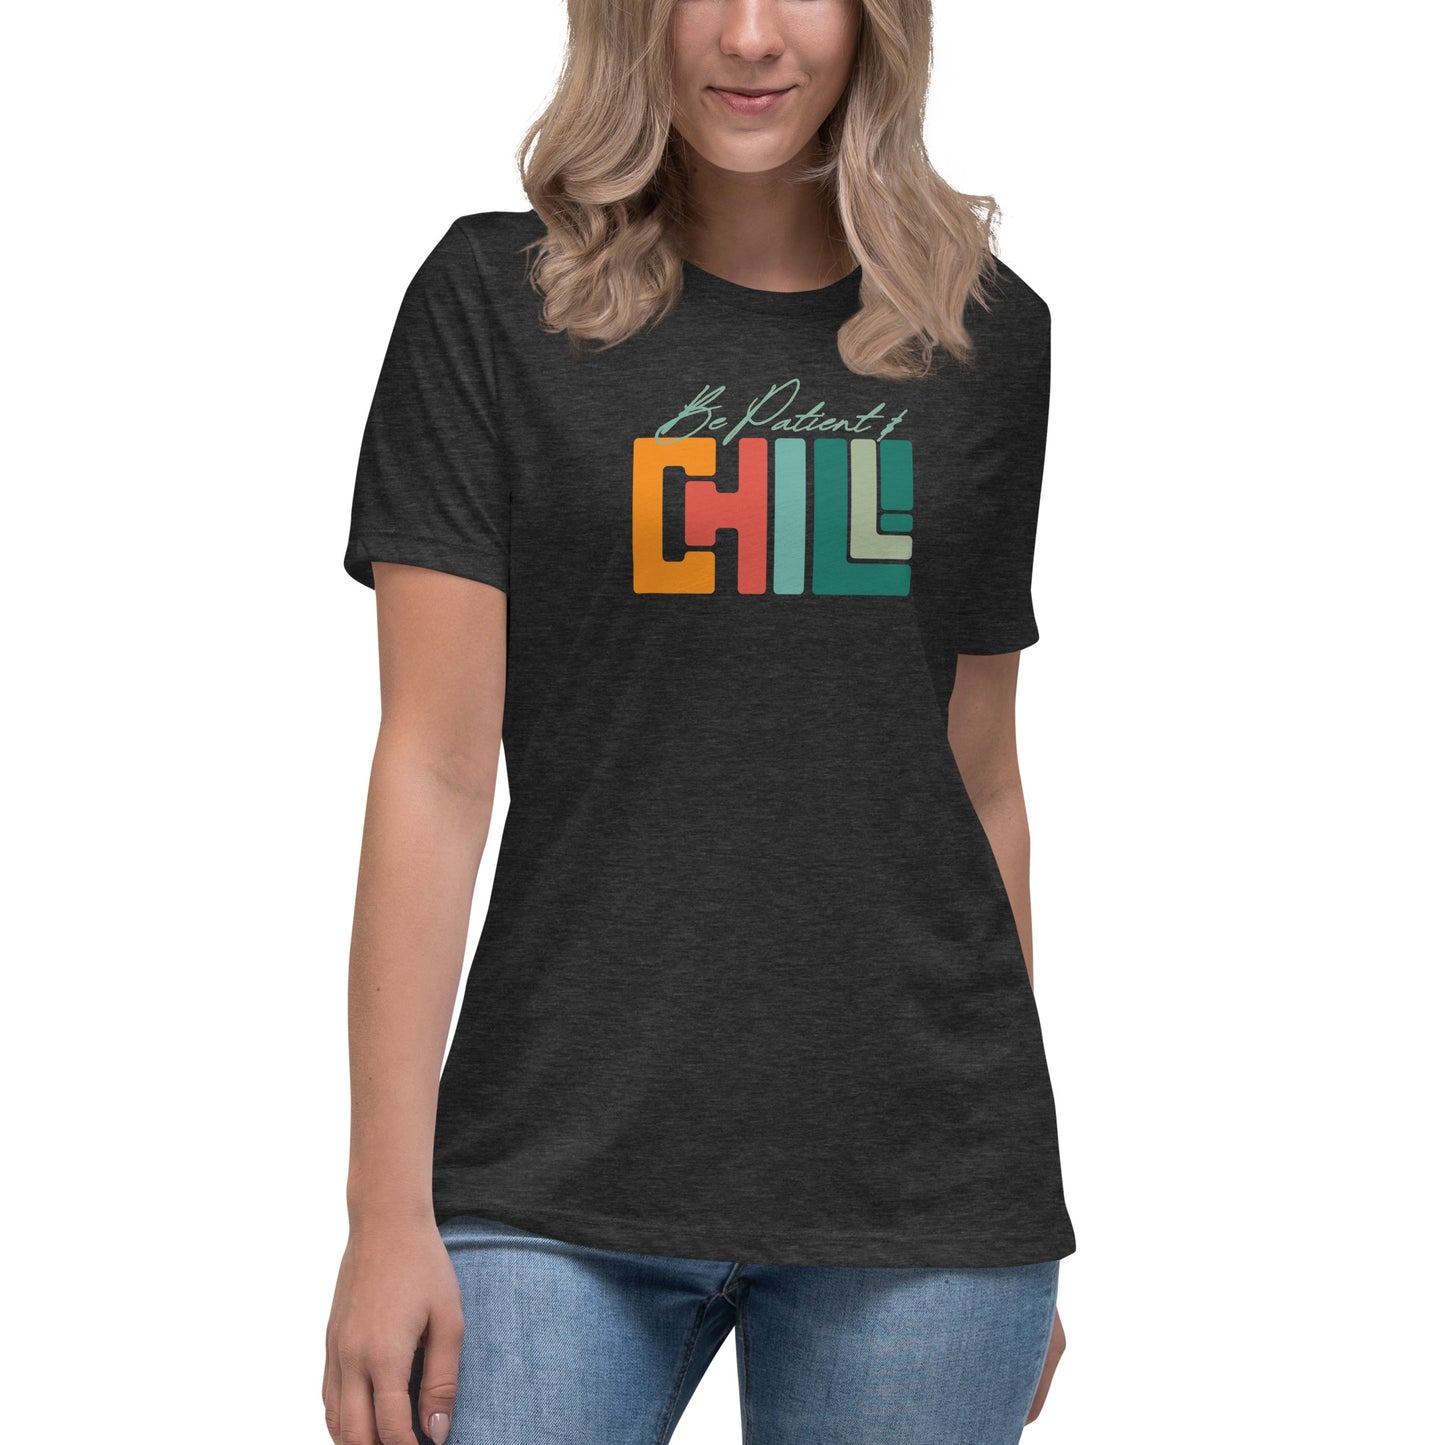 Be Patient & Chill! Women's Relaxed T-Shirt